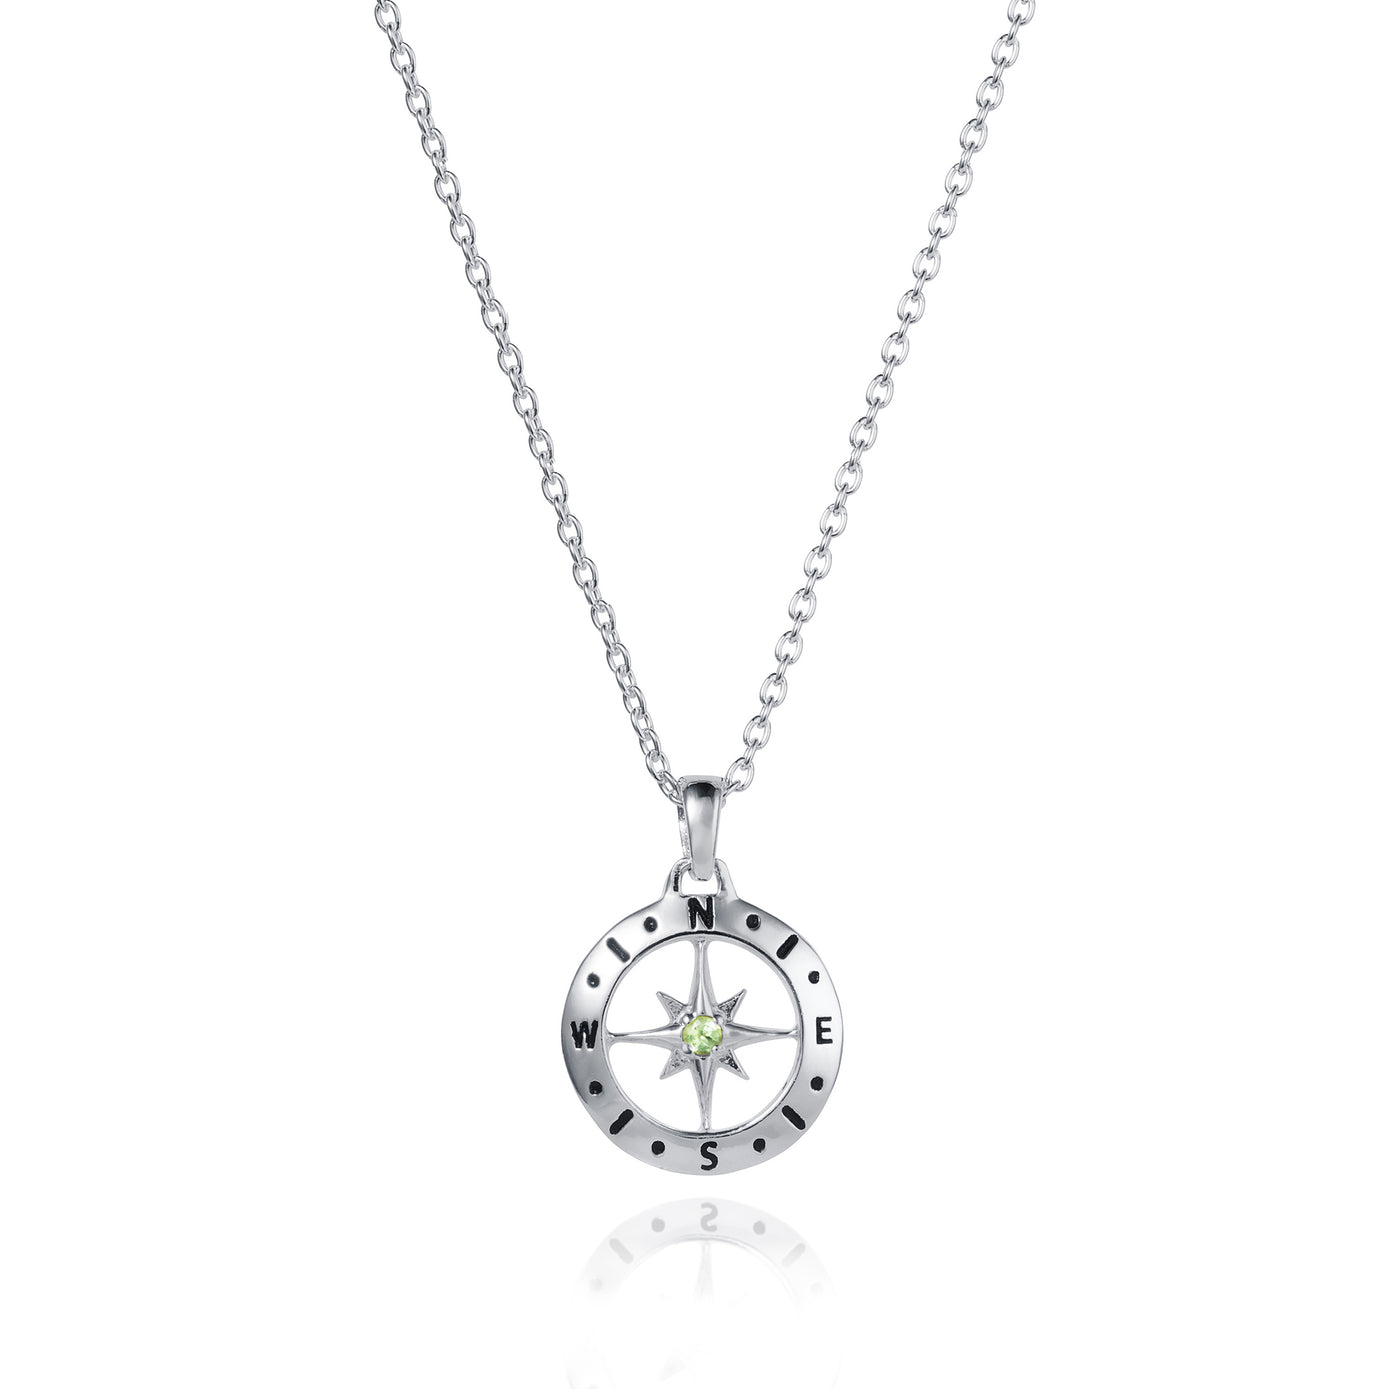 Photo of Silver Compass Necklace with August Birthstone Peridot